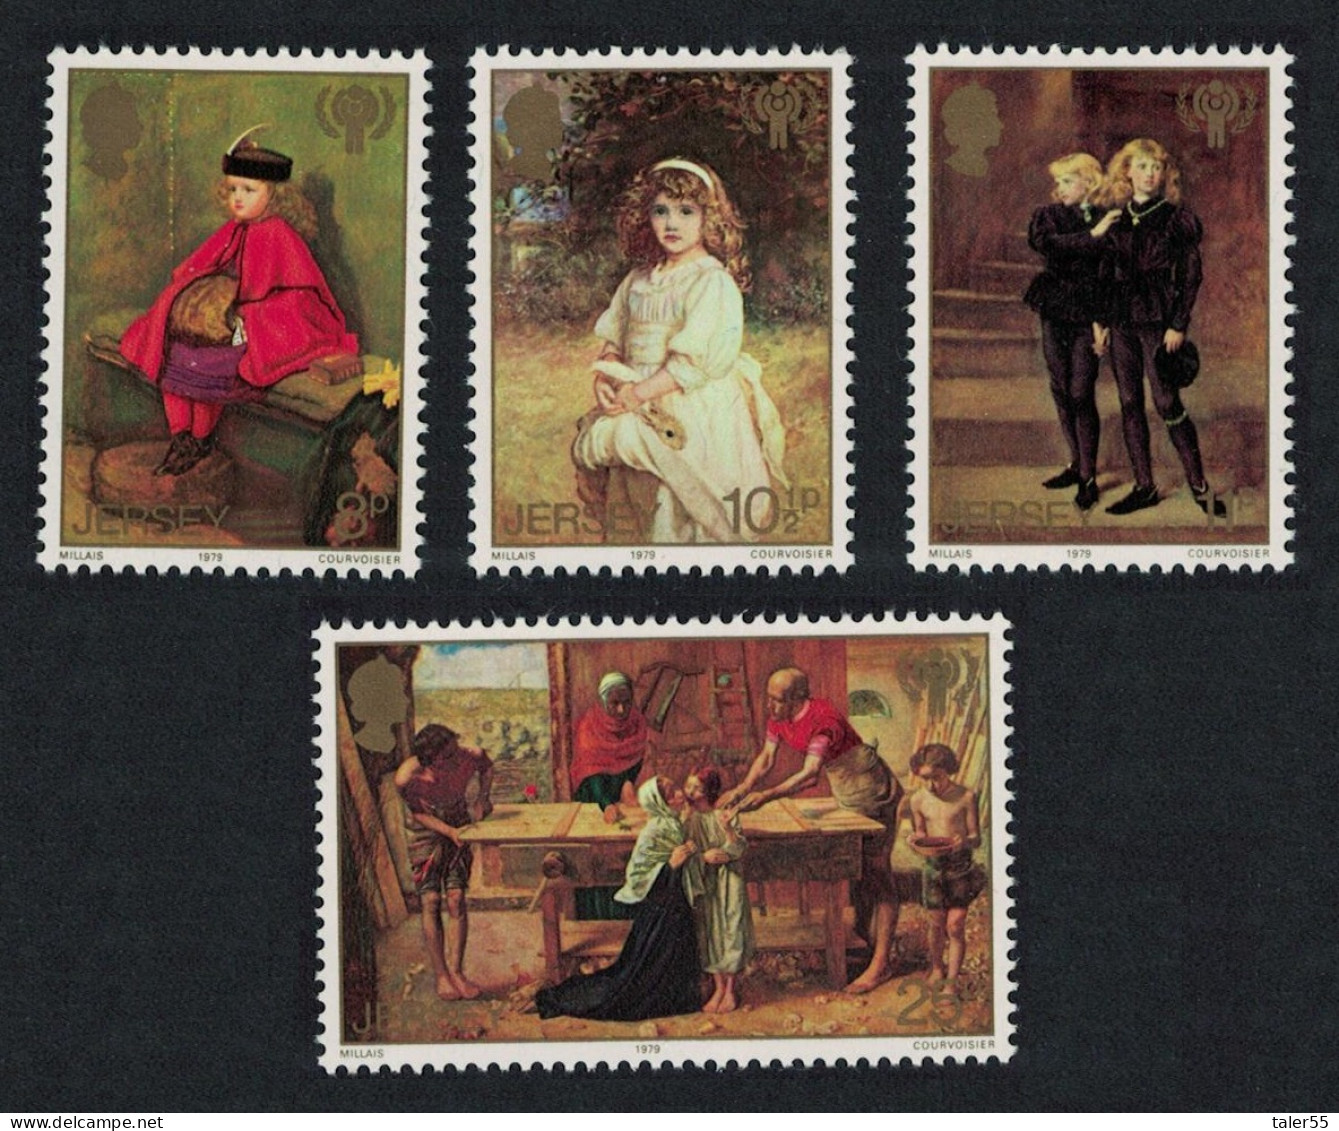 Jersey Paintings By Sir John Millais International Year Of The Child 4v 1979 MNH SG#213-216 - Jersey